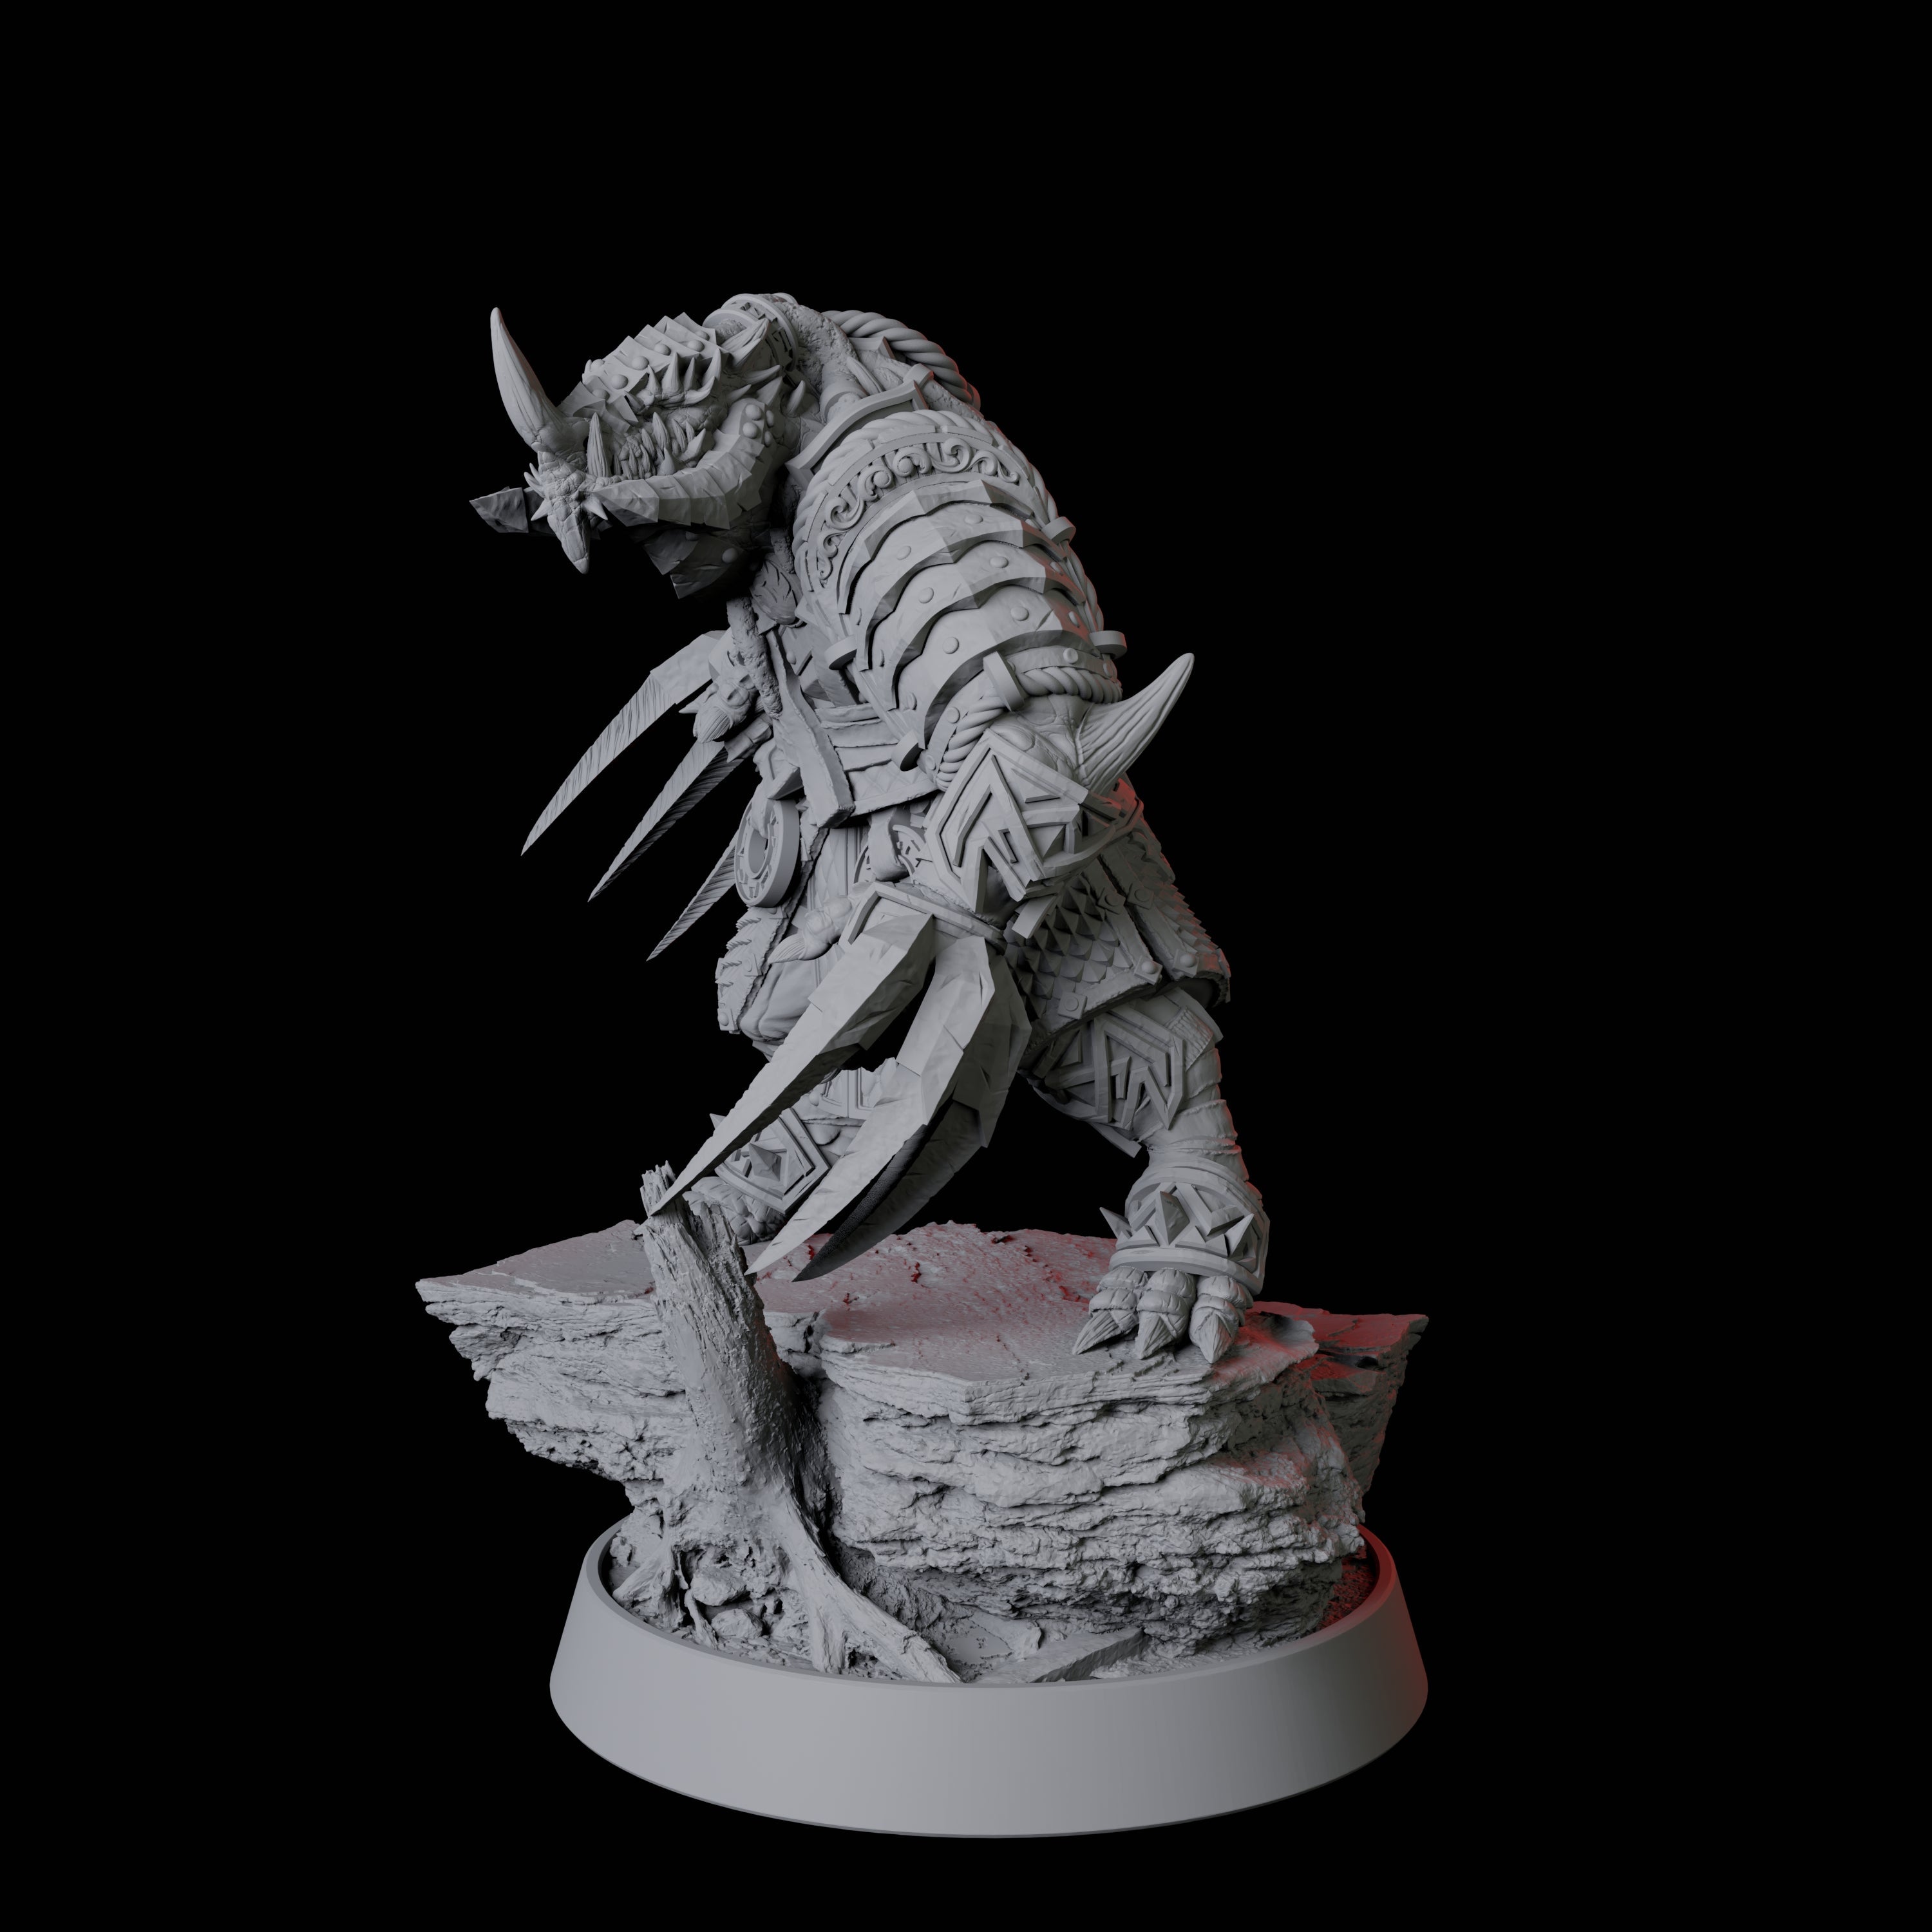 Wolverine Dragonborn Fighter Miniature for Dungeons and Dragons